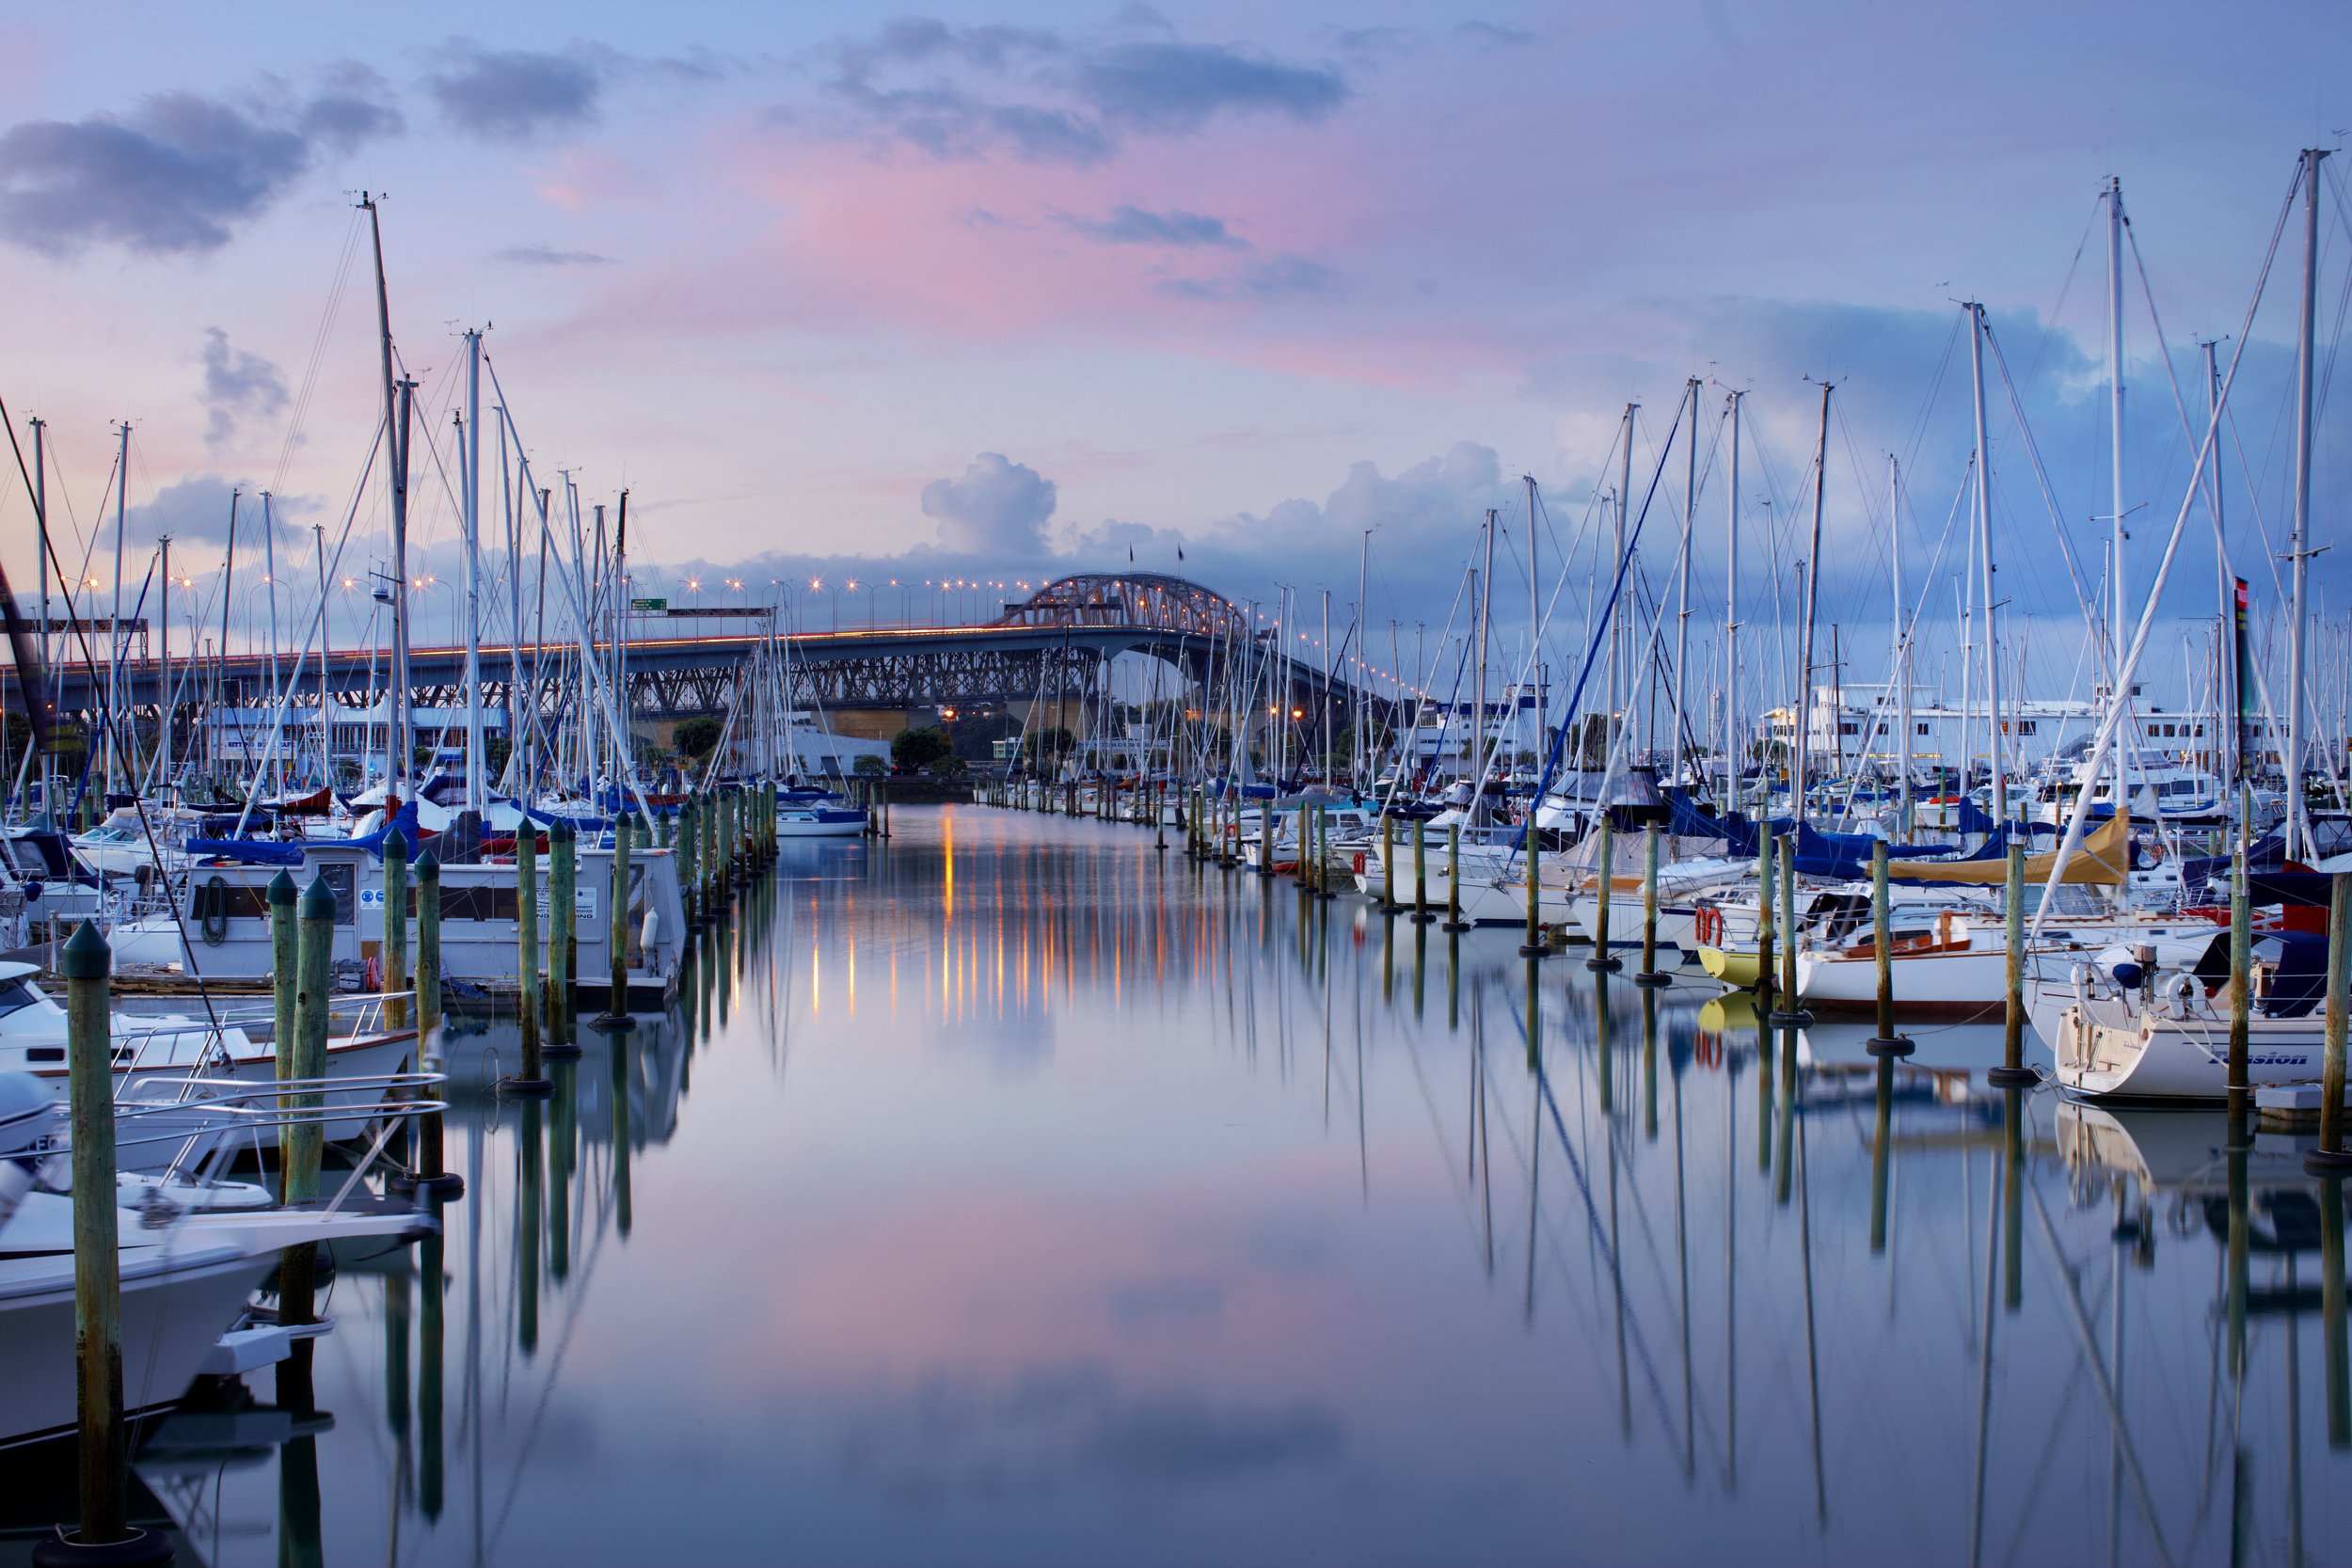 Yachts at sunset, Westhaven Marina with Auckland Harbour Bridge_77984.jpg